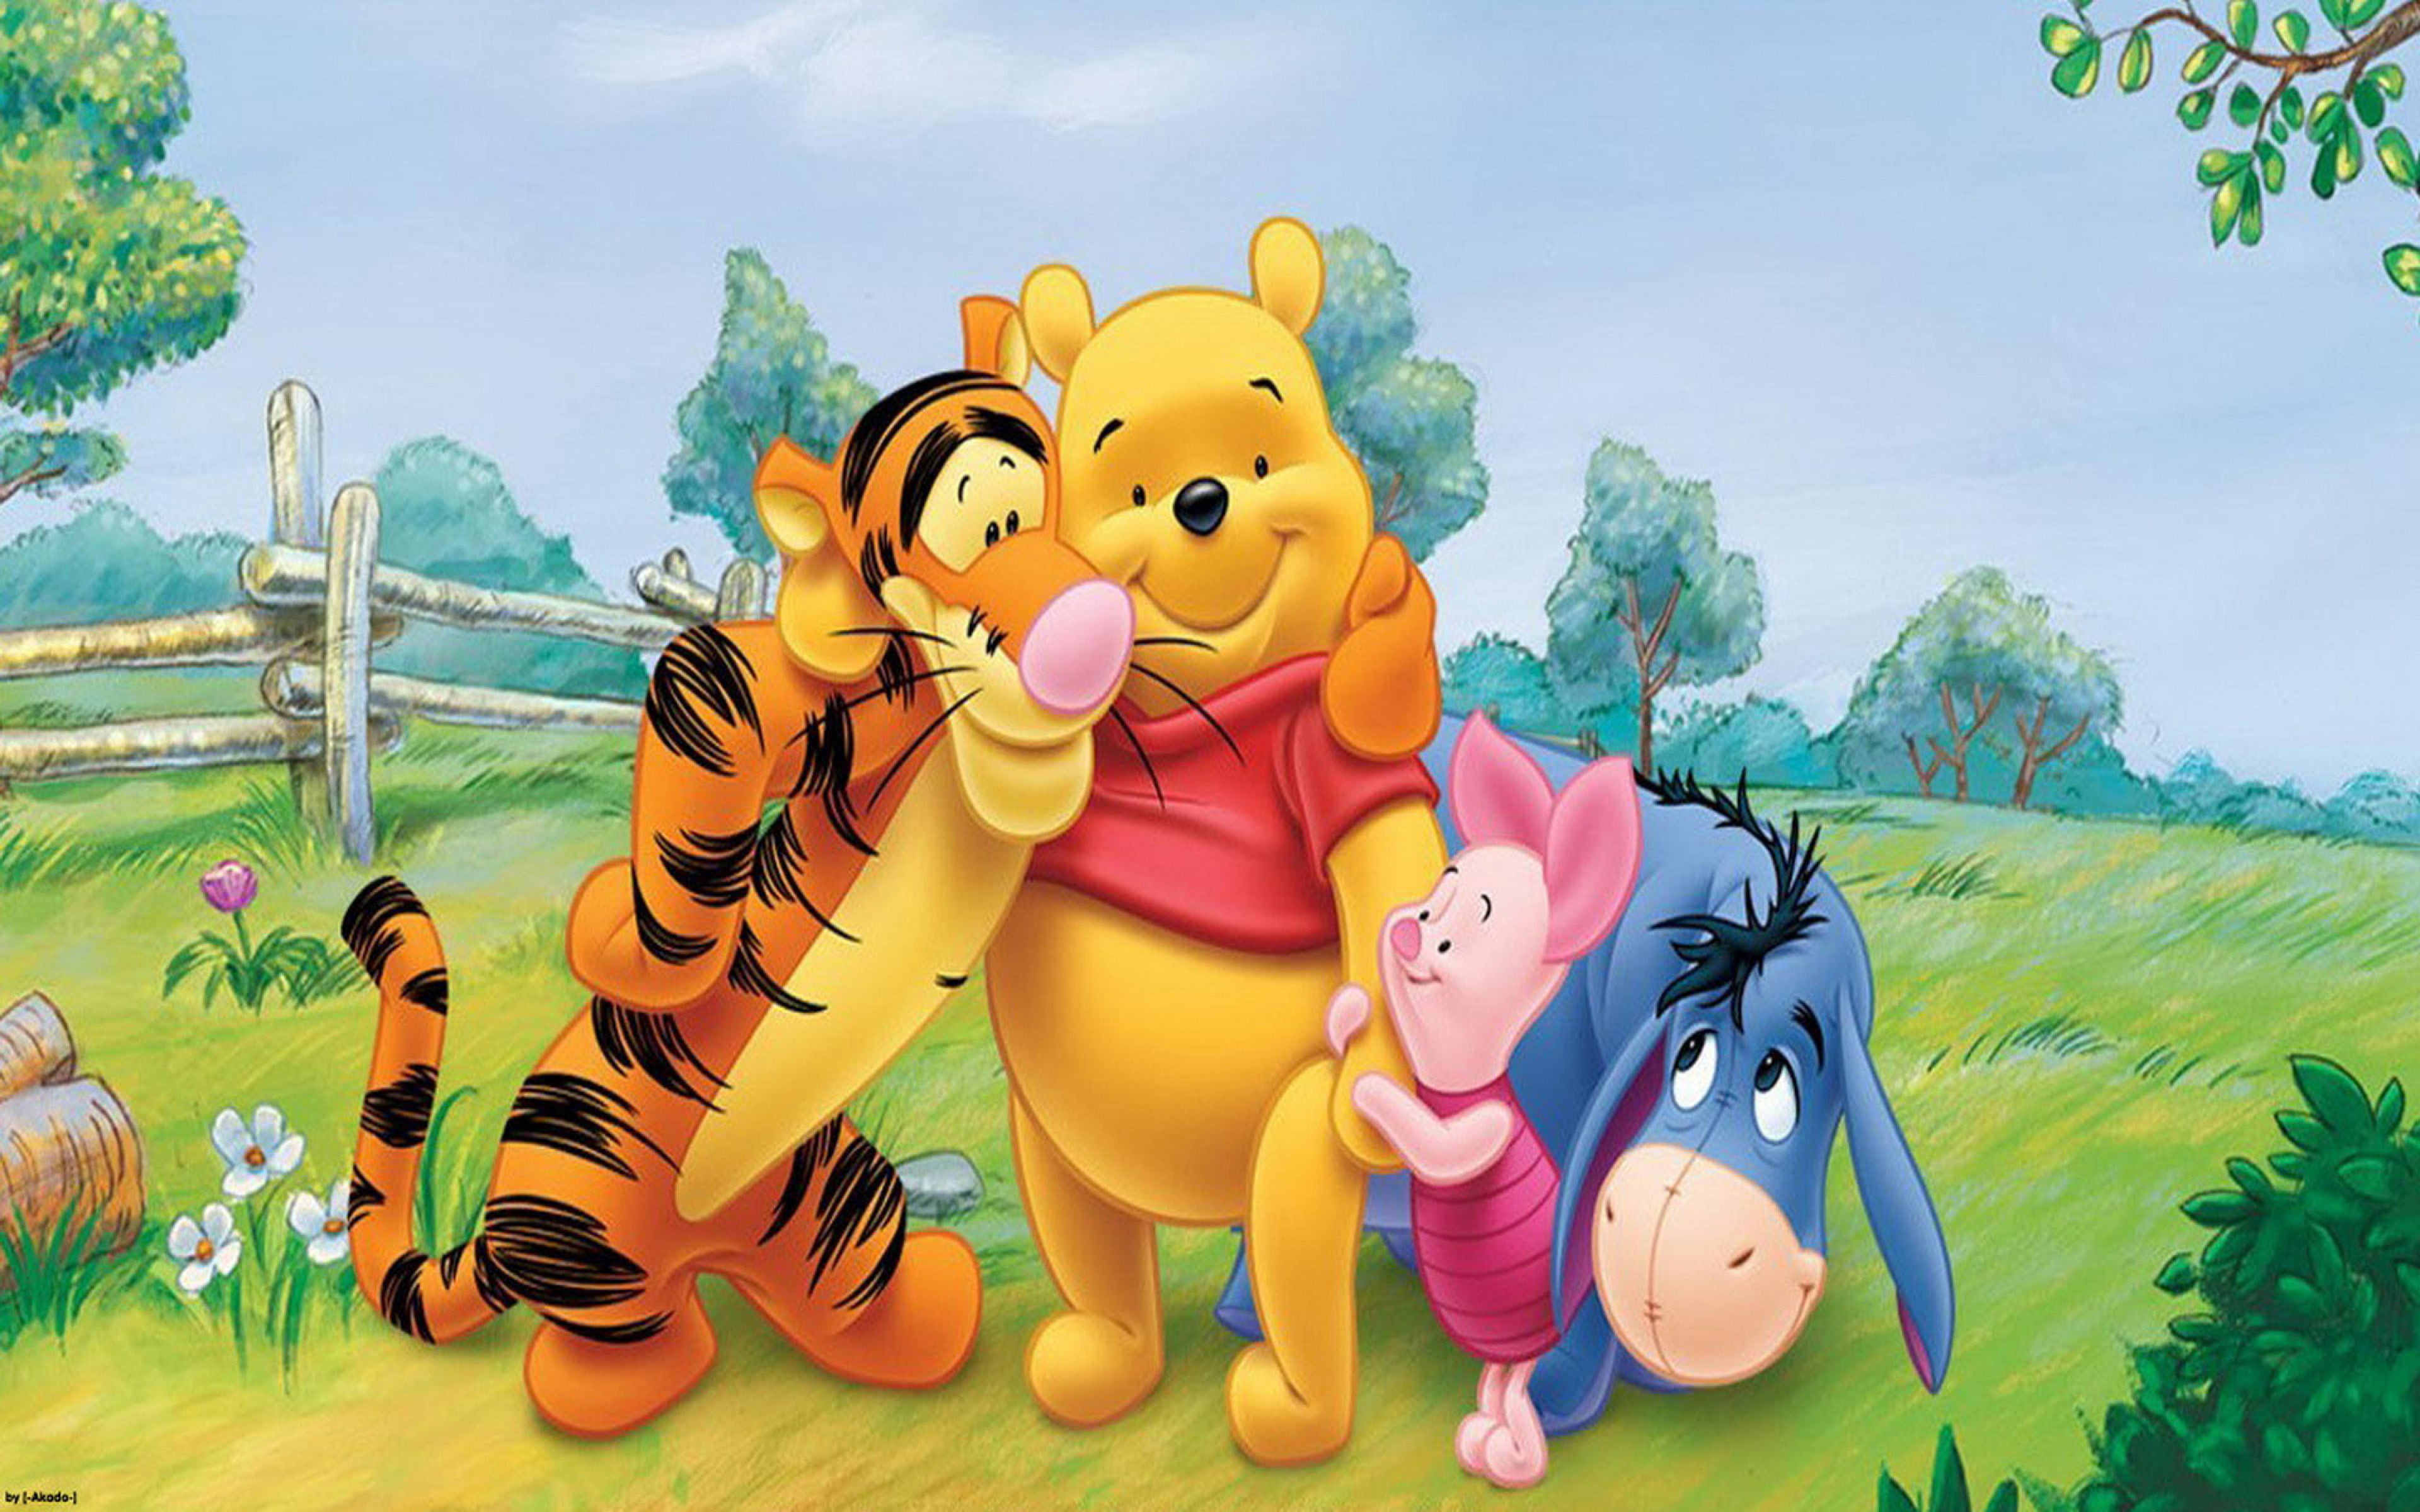 Winnie The Pooh Tigger Piglet Eeyore Hd Wallpapers For Mobile Phones Tablet And Laptop 3840×2400